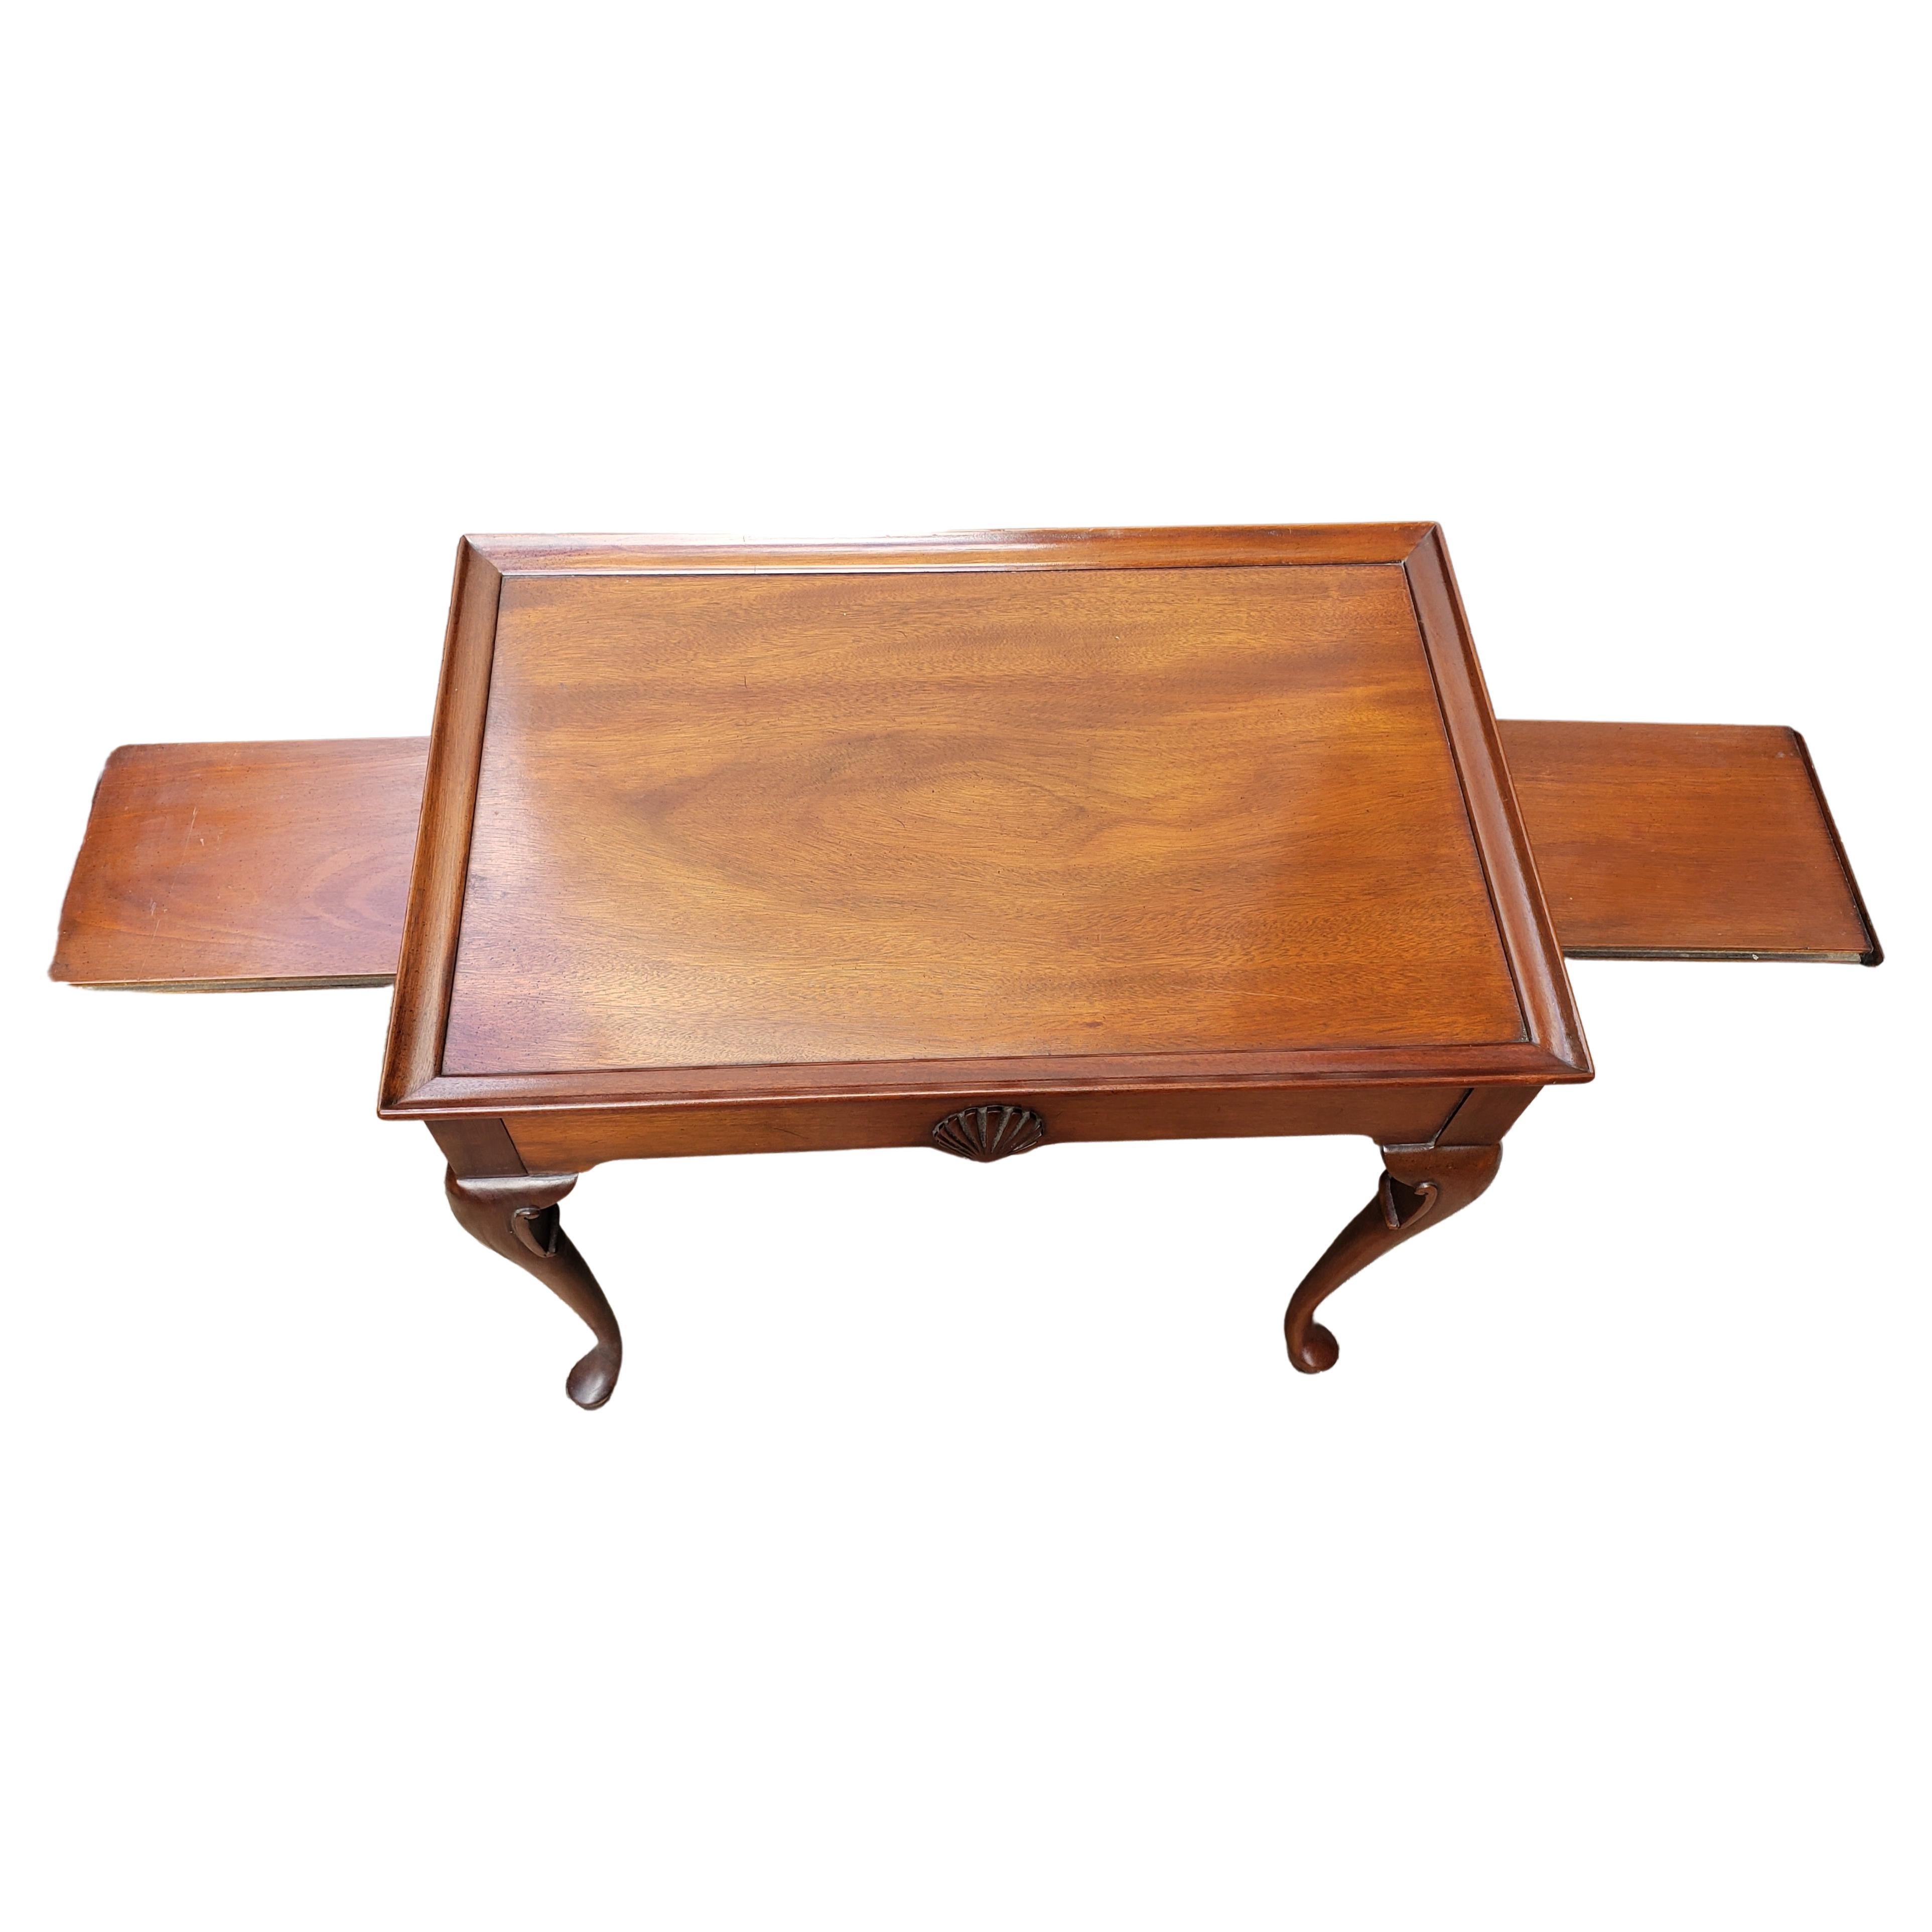 Woodwork 1950s English Mahogany Queen Anne Tray Top Tea Table by Hickory Chair Co. For Sale